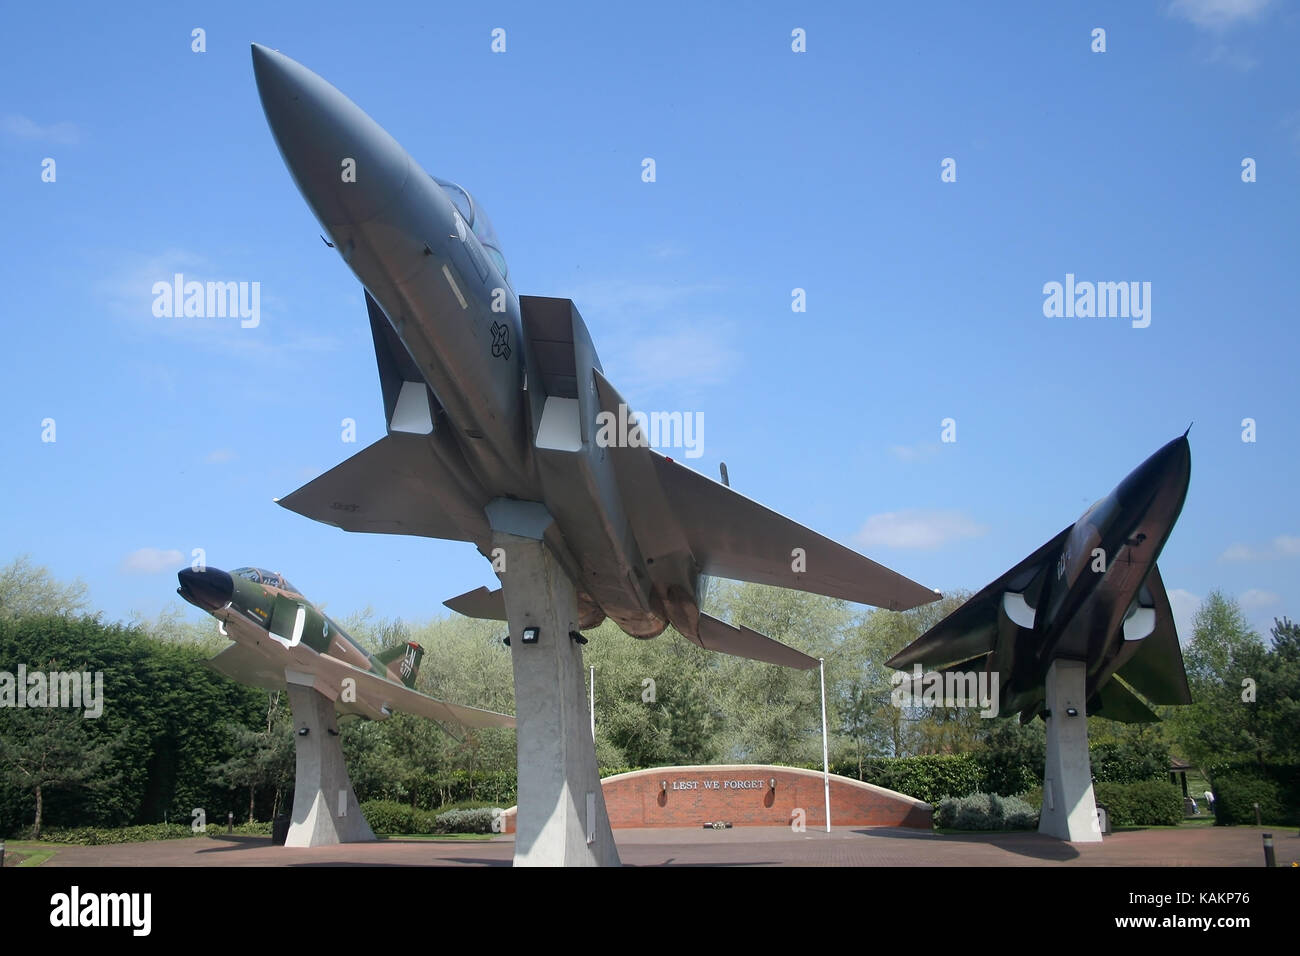 Three aircraft types flown by 48th Fighter Wing at RAF Lakenheath preserved as gate guards, F-4, F-111 and the current type, the F-15 Eagle. Stock Photo